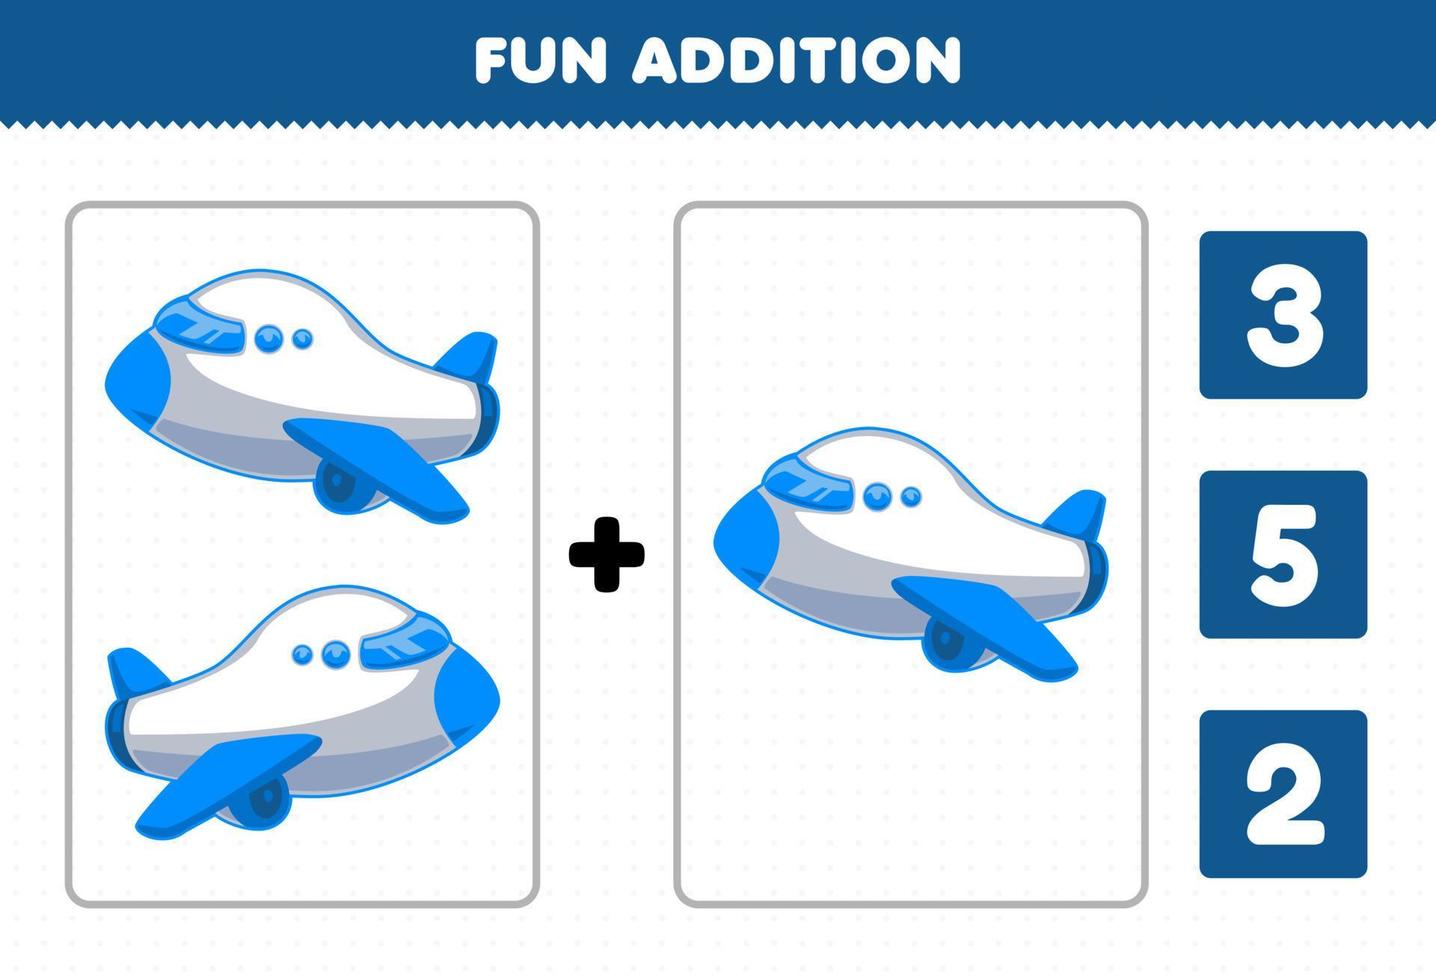 Education game for children fun addition by count and choose the correct answer of cartoon flying transportation plane printable worksheet vector